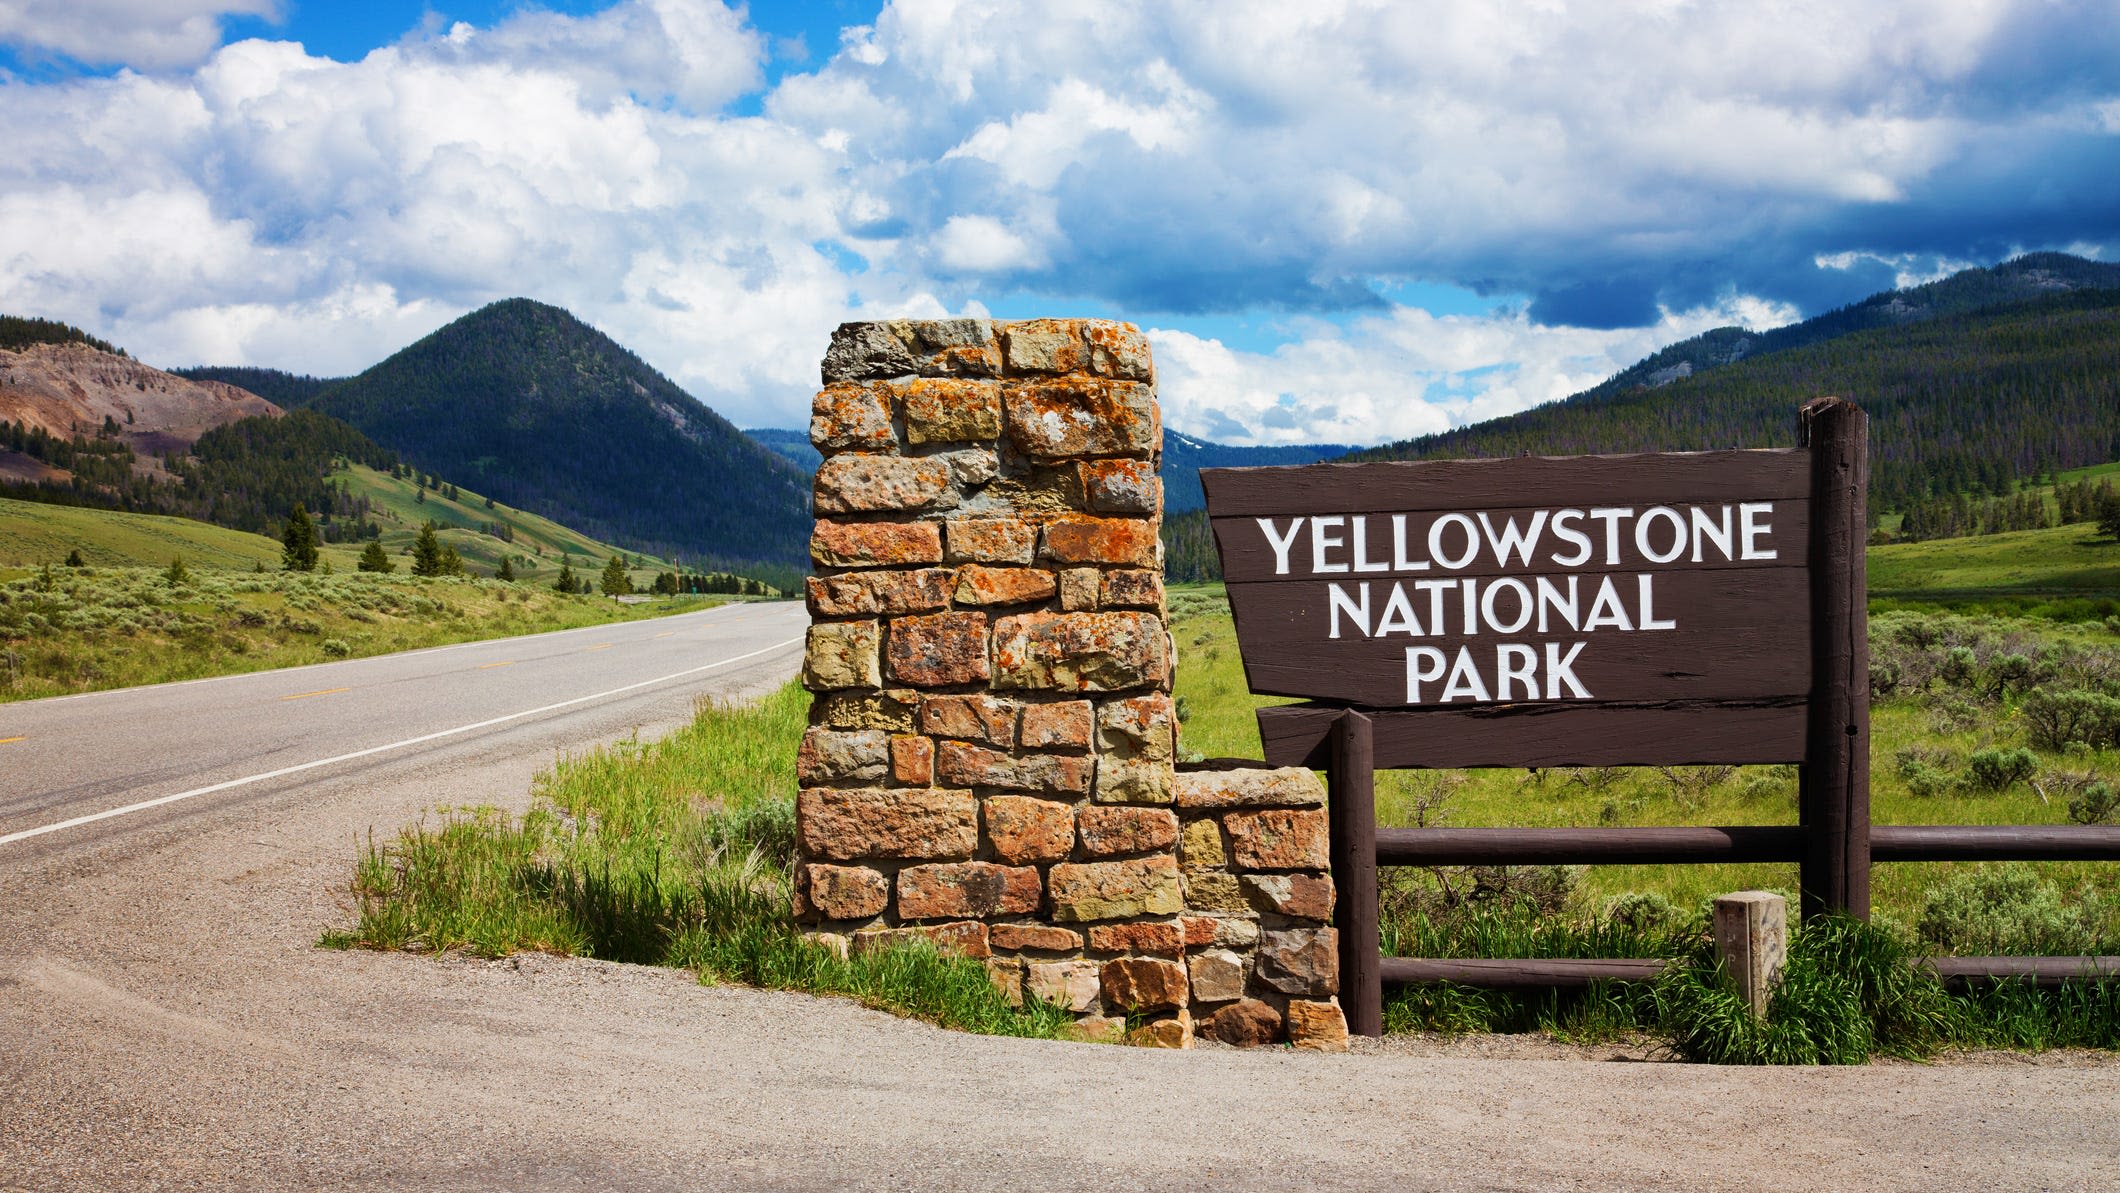 Armed man fatally shot in gunfire exchange at Yellowstone National Park identified